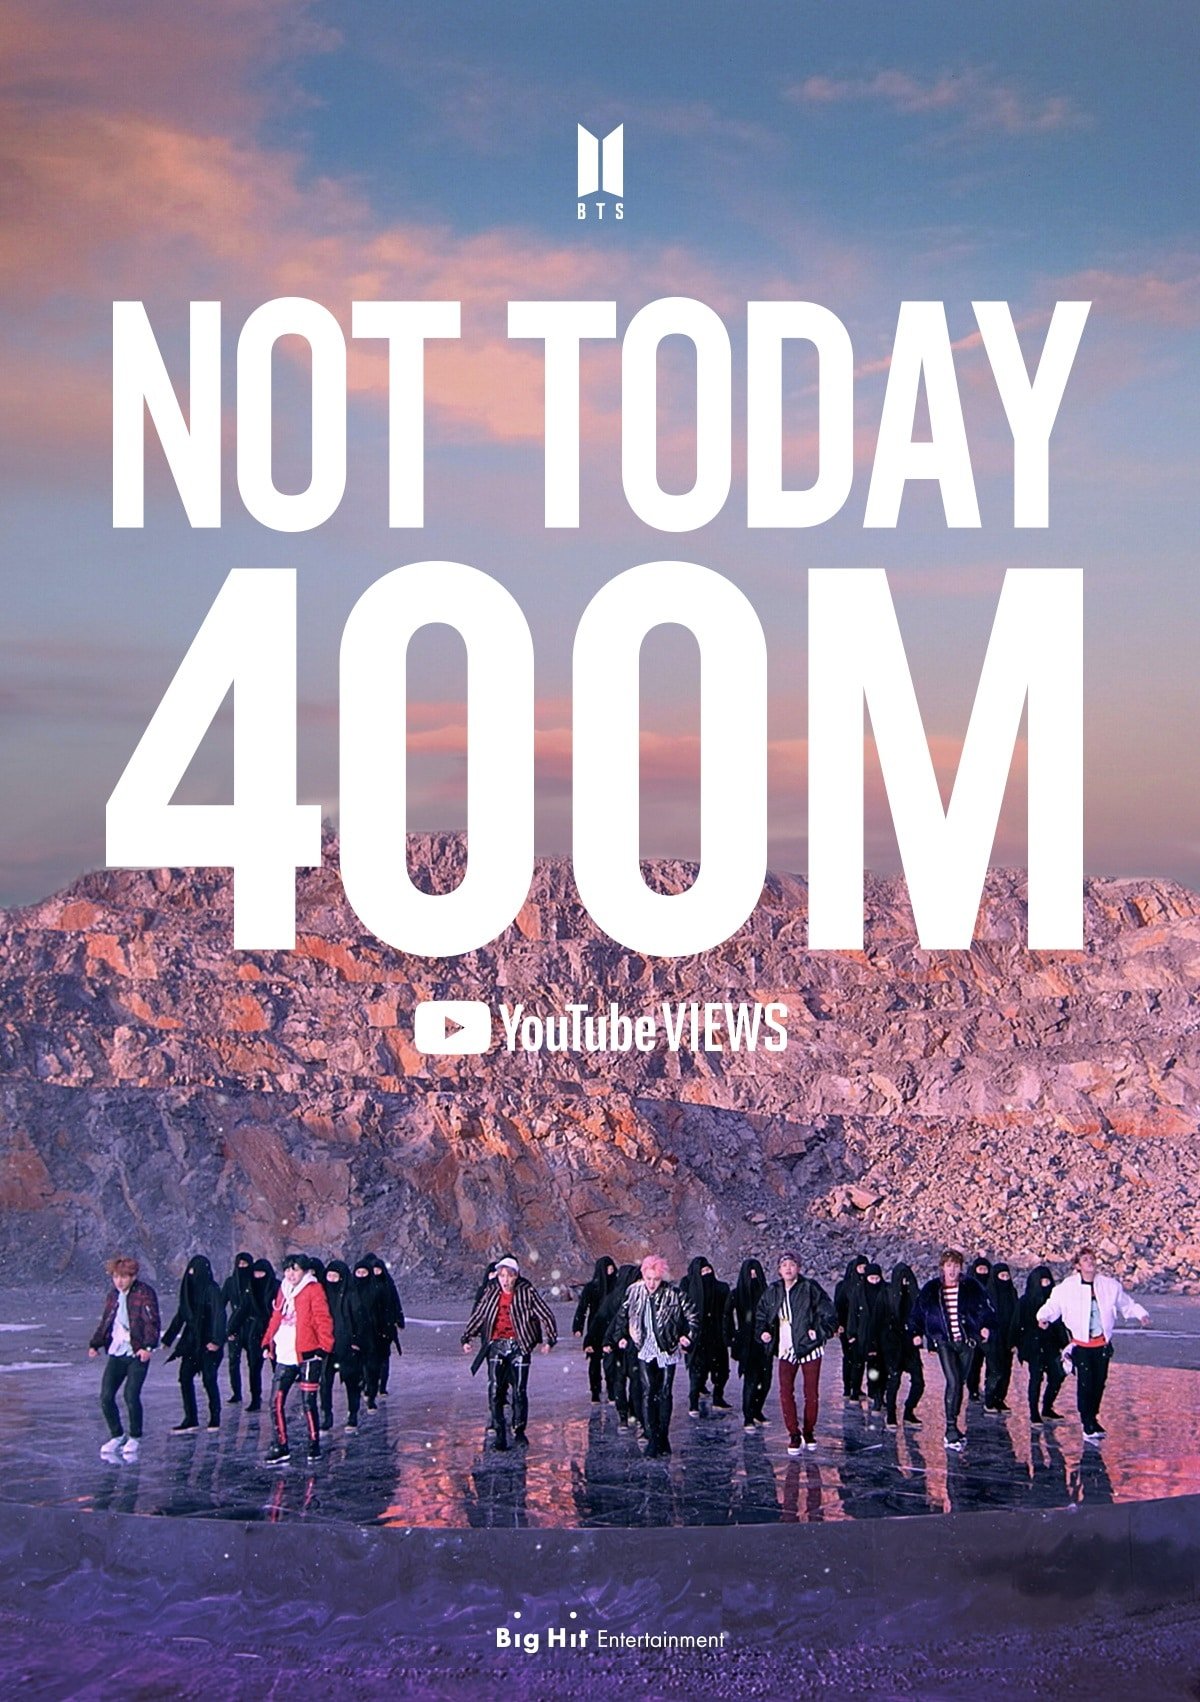 BTS' "Not Today" music video has surpassed 400 million views...There are 10 music videos with 400 million views